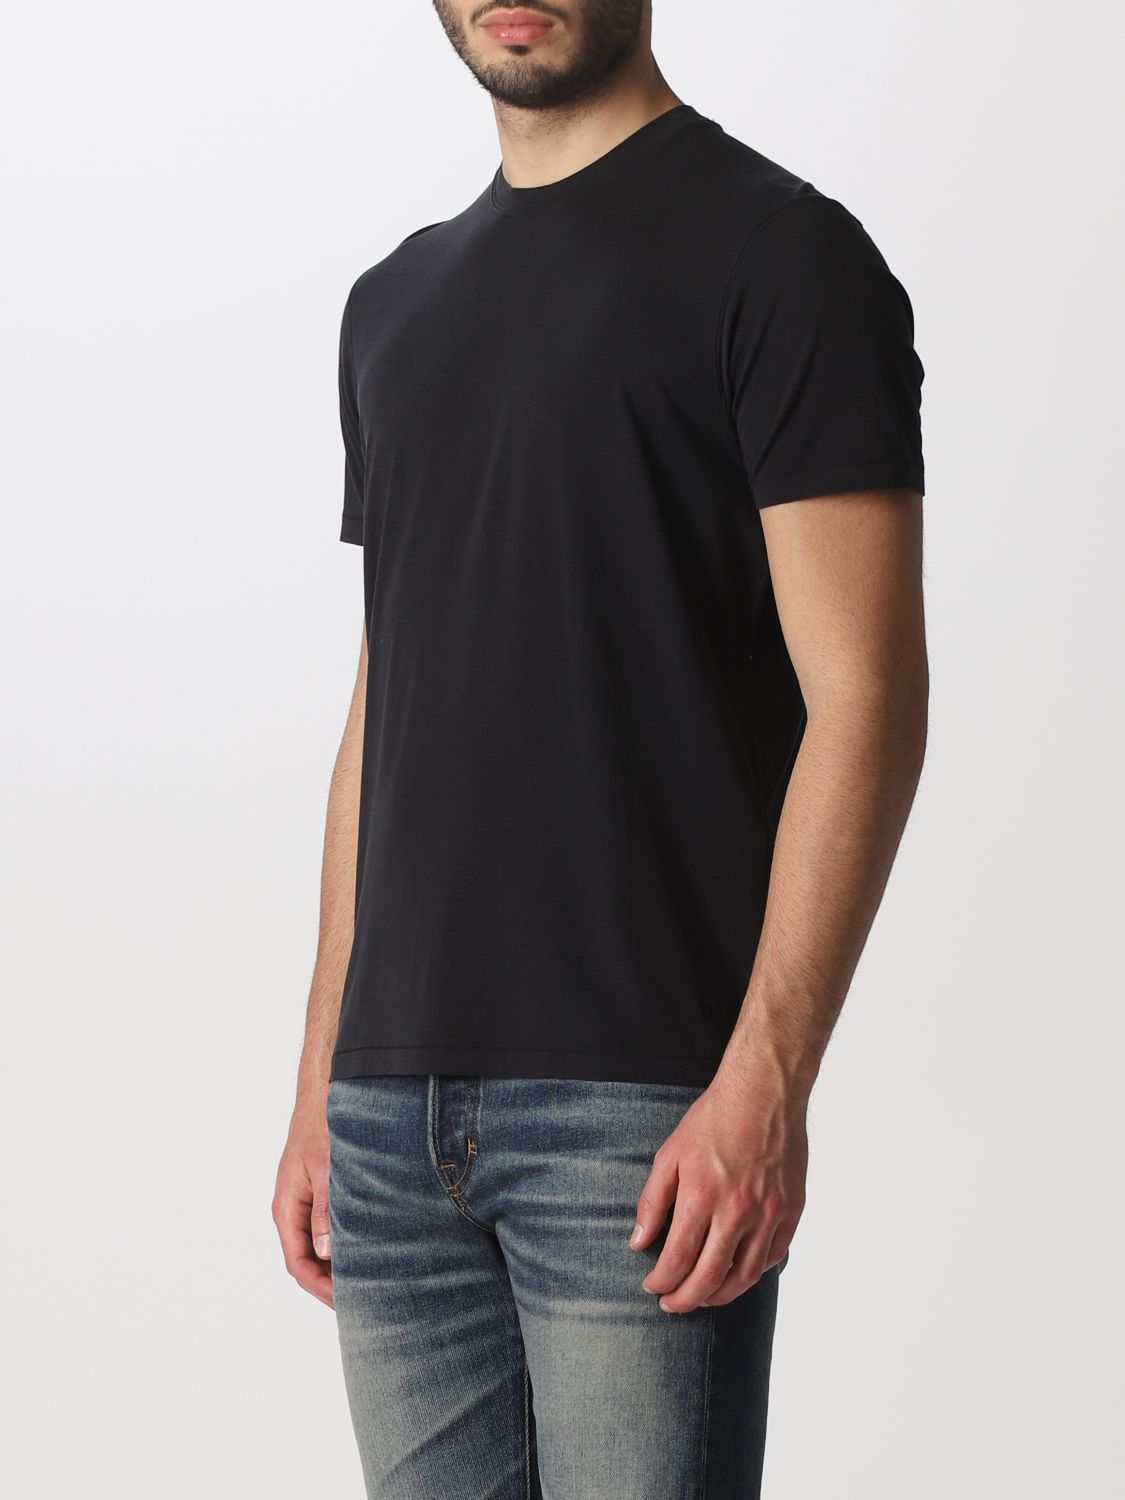 Tom Ford T-shirt in cotton blend